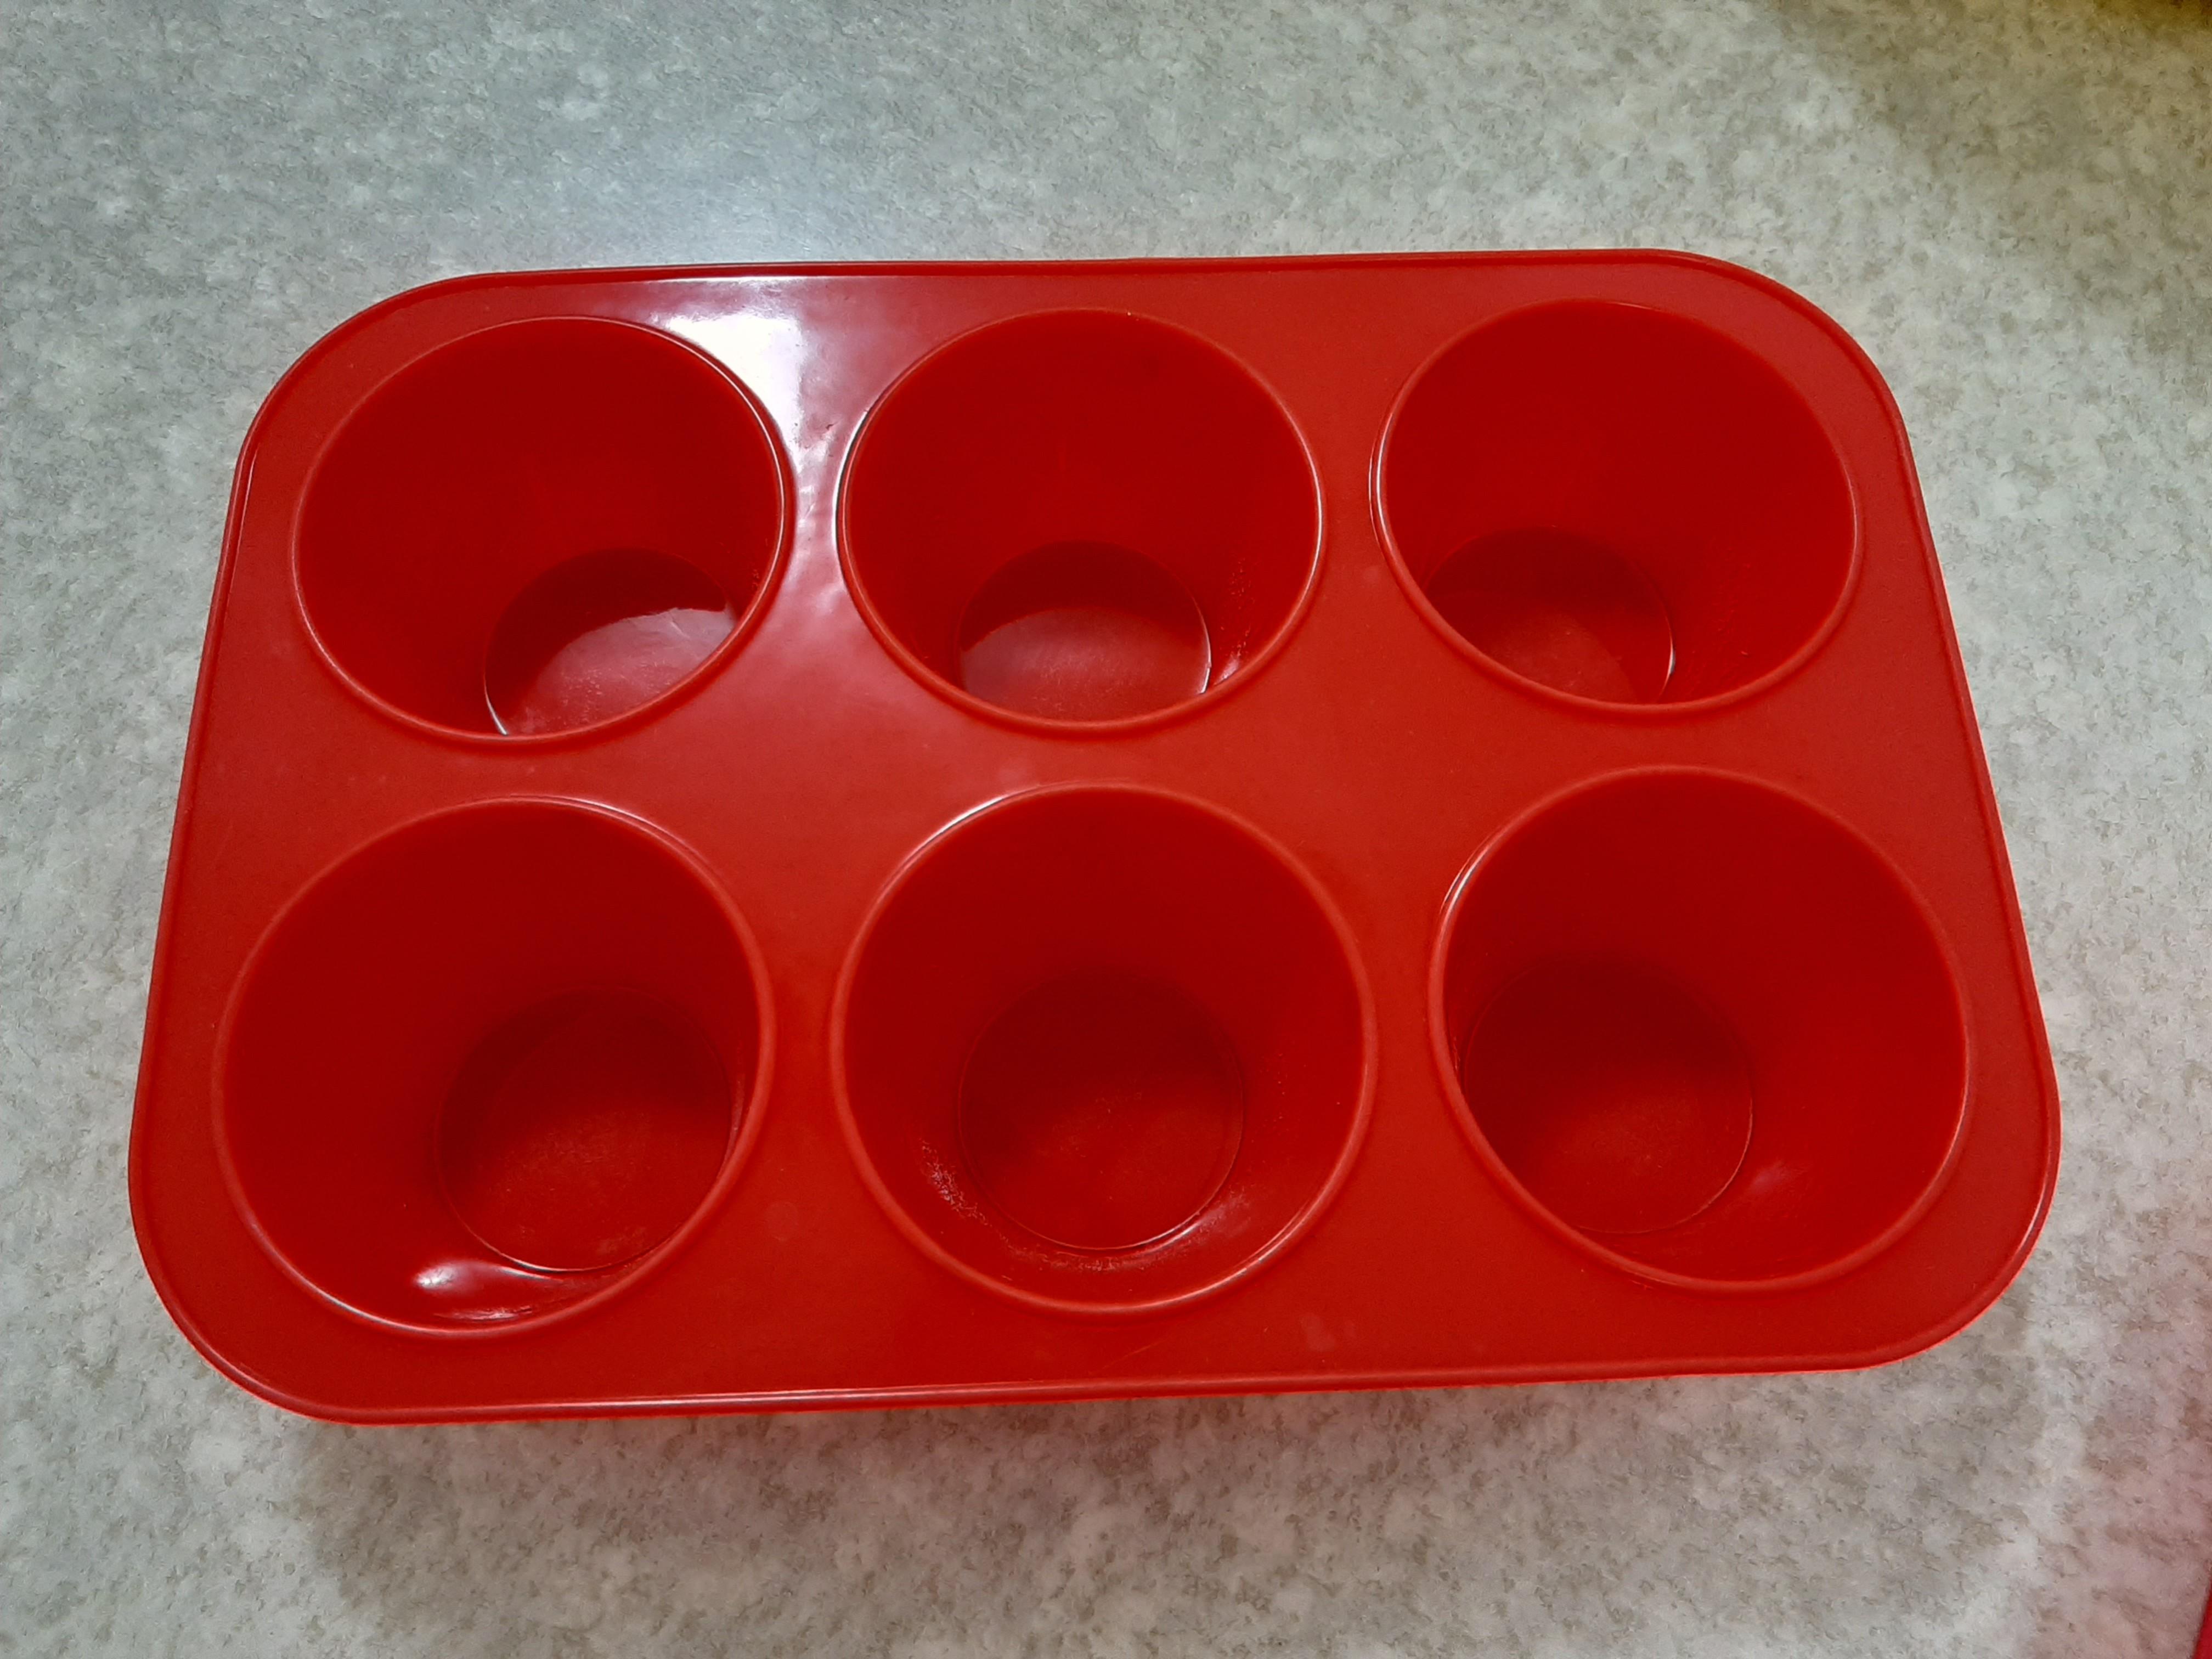 PRESS 6 Cup Non-Stick Silicone Muffin Pan with Lid